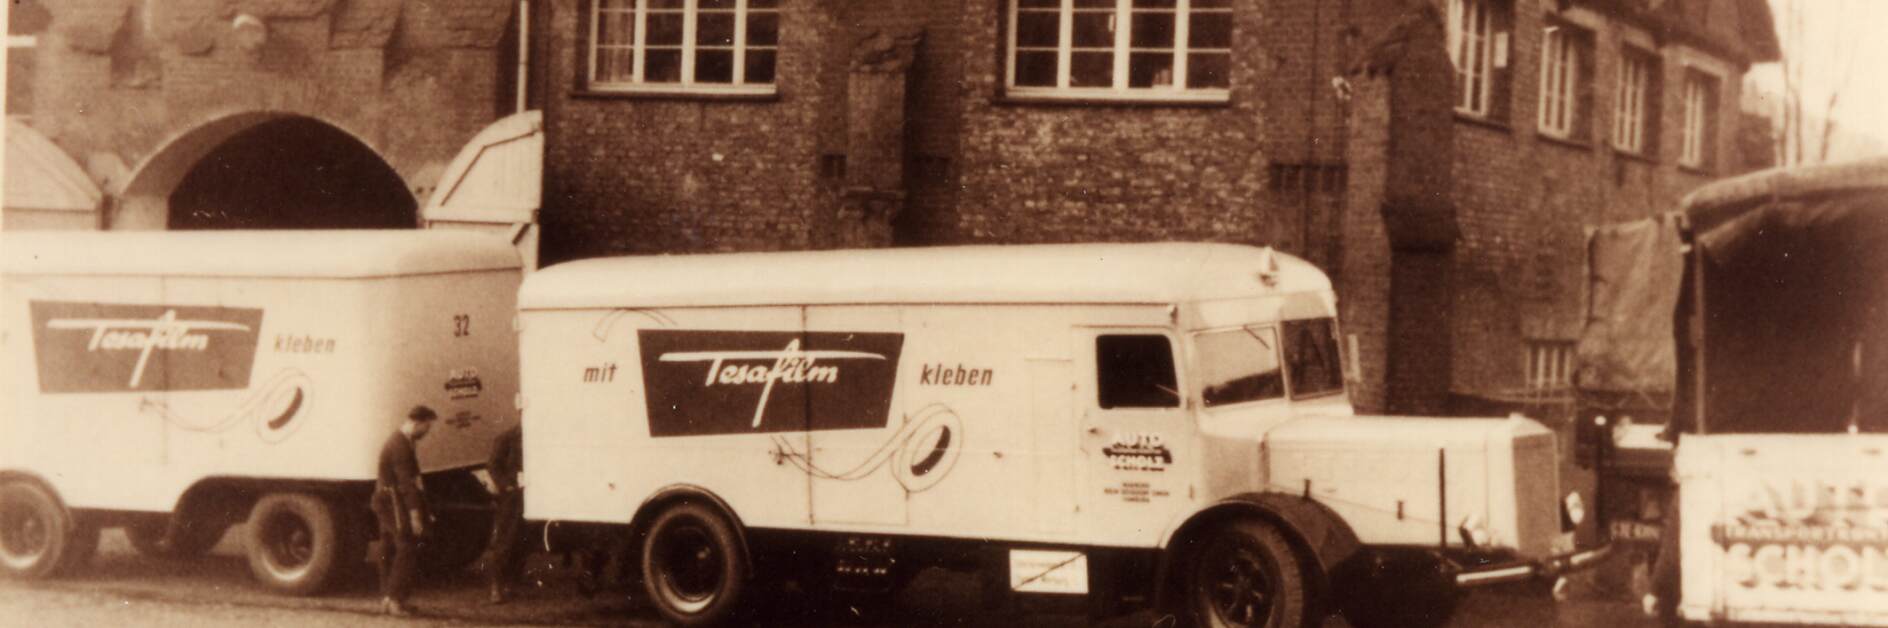 tesa Truck with tesafilm Advertisement from 1952